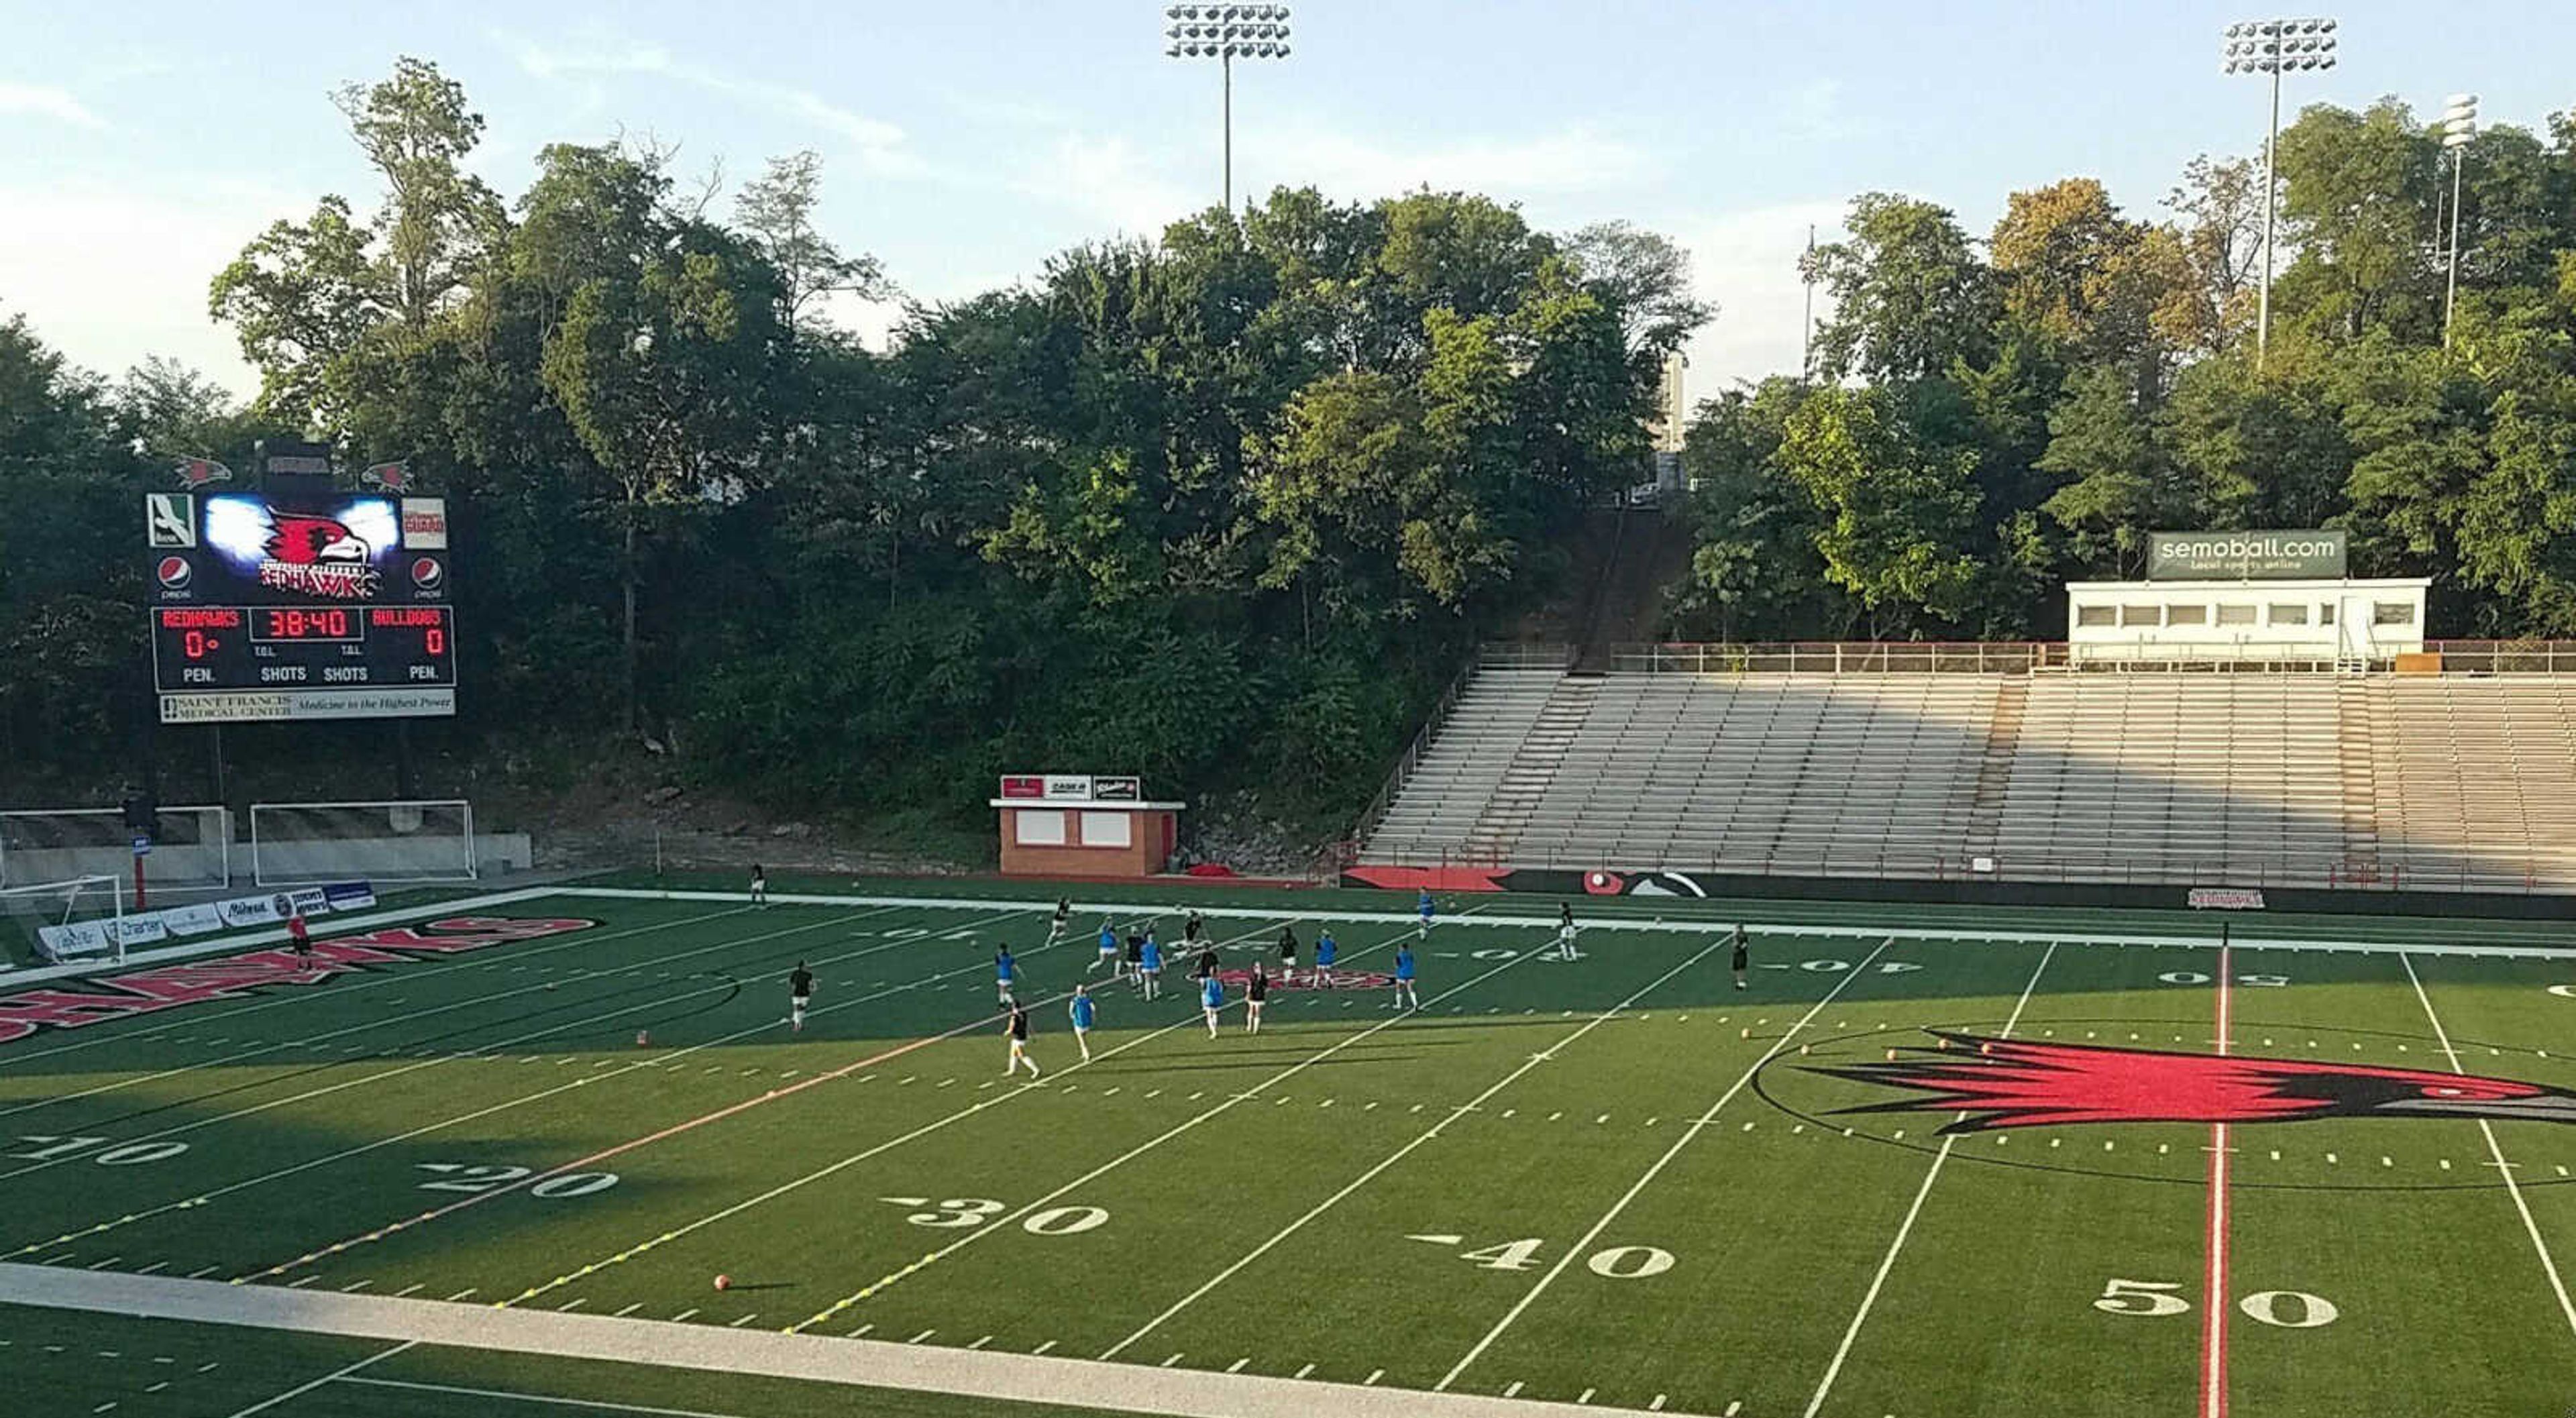 The Southeast Missouri State women's soccer team warms up before the game against Union on Sept. 7.